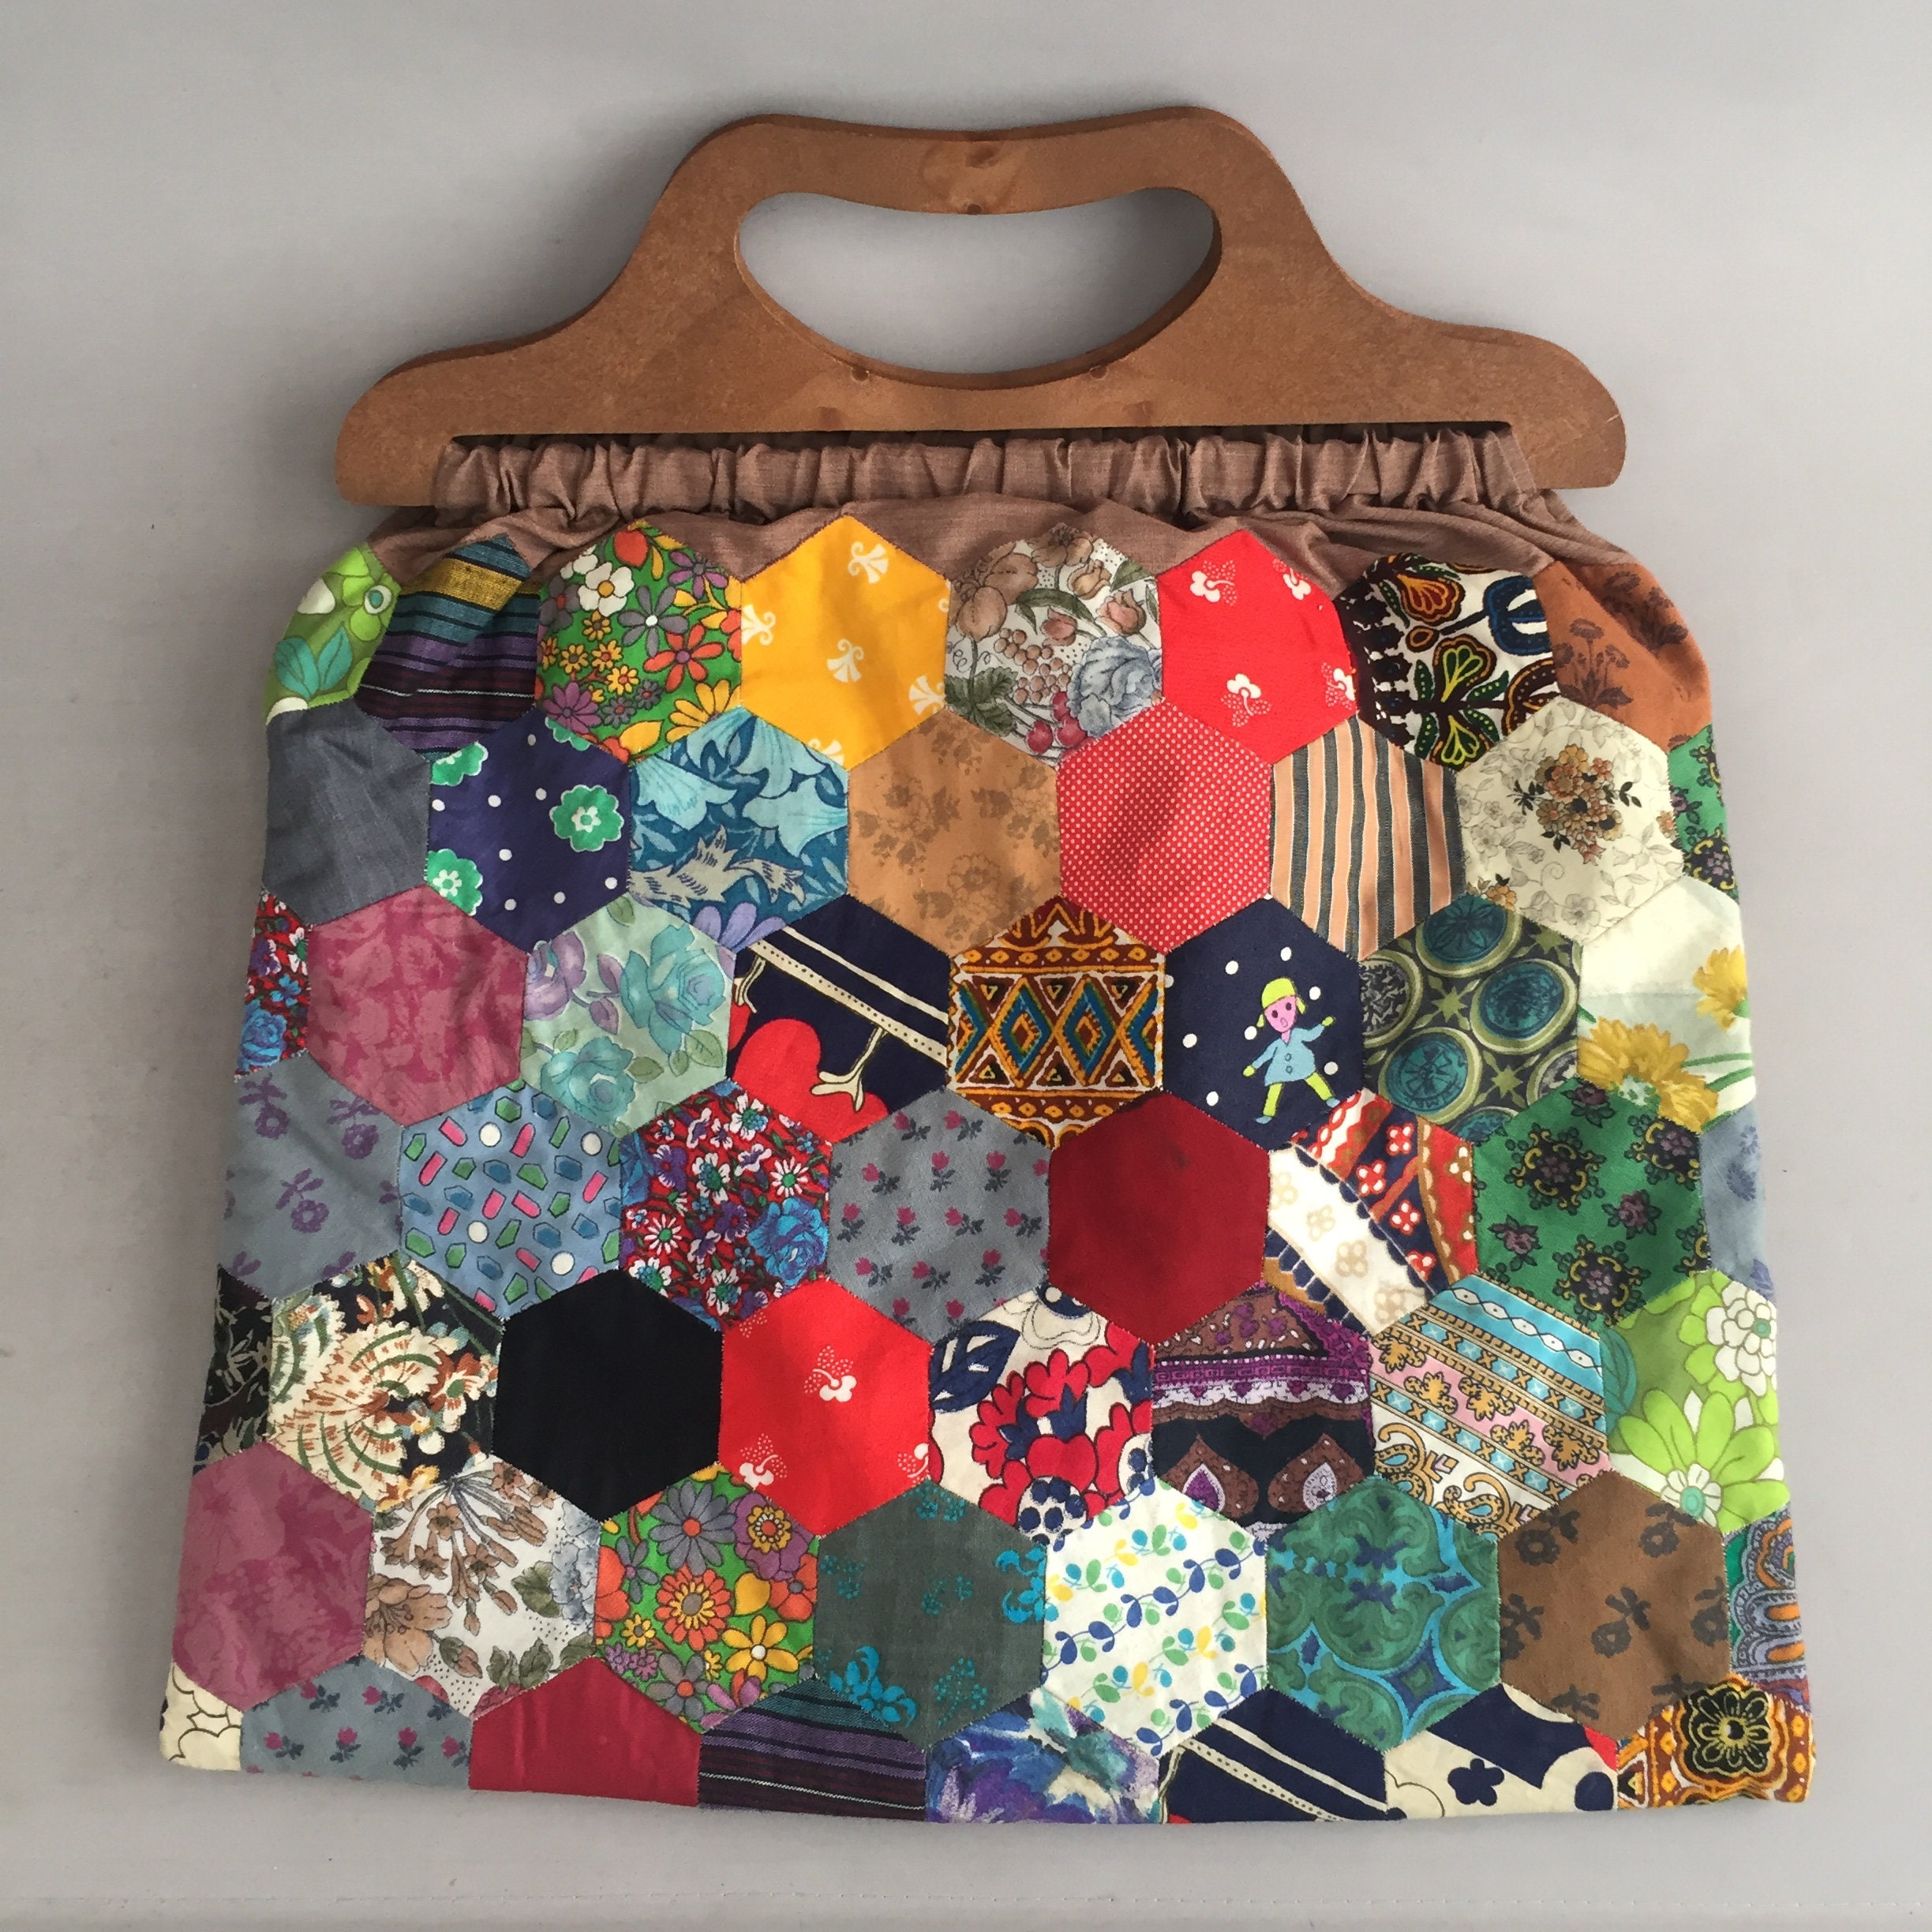 1960s patch work knitting bag